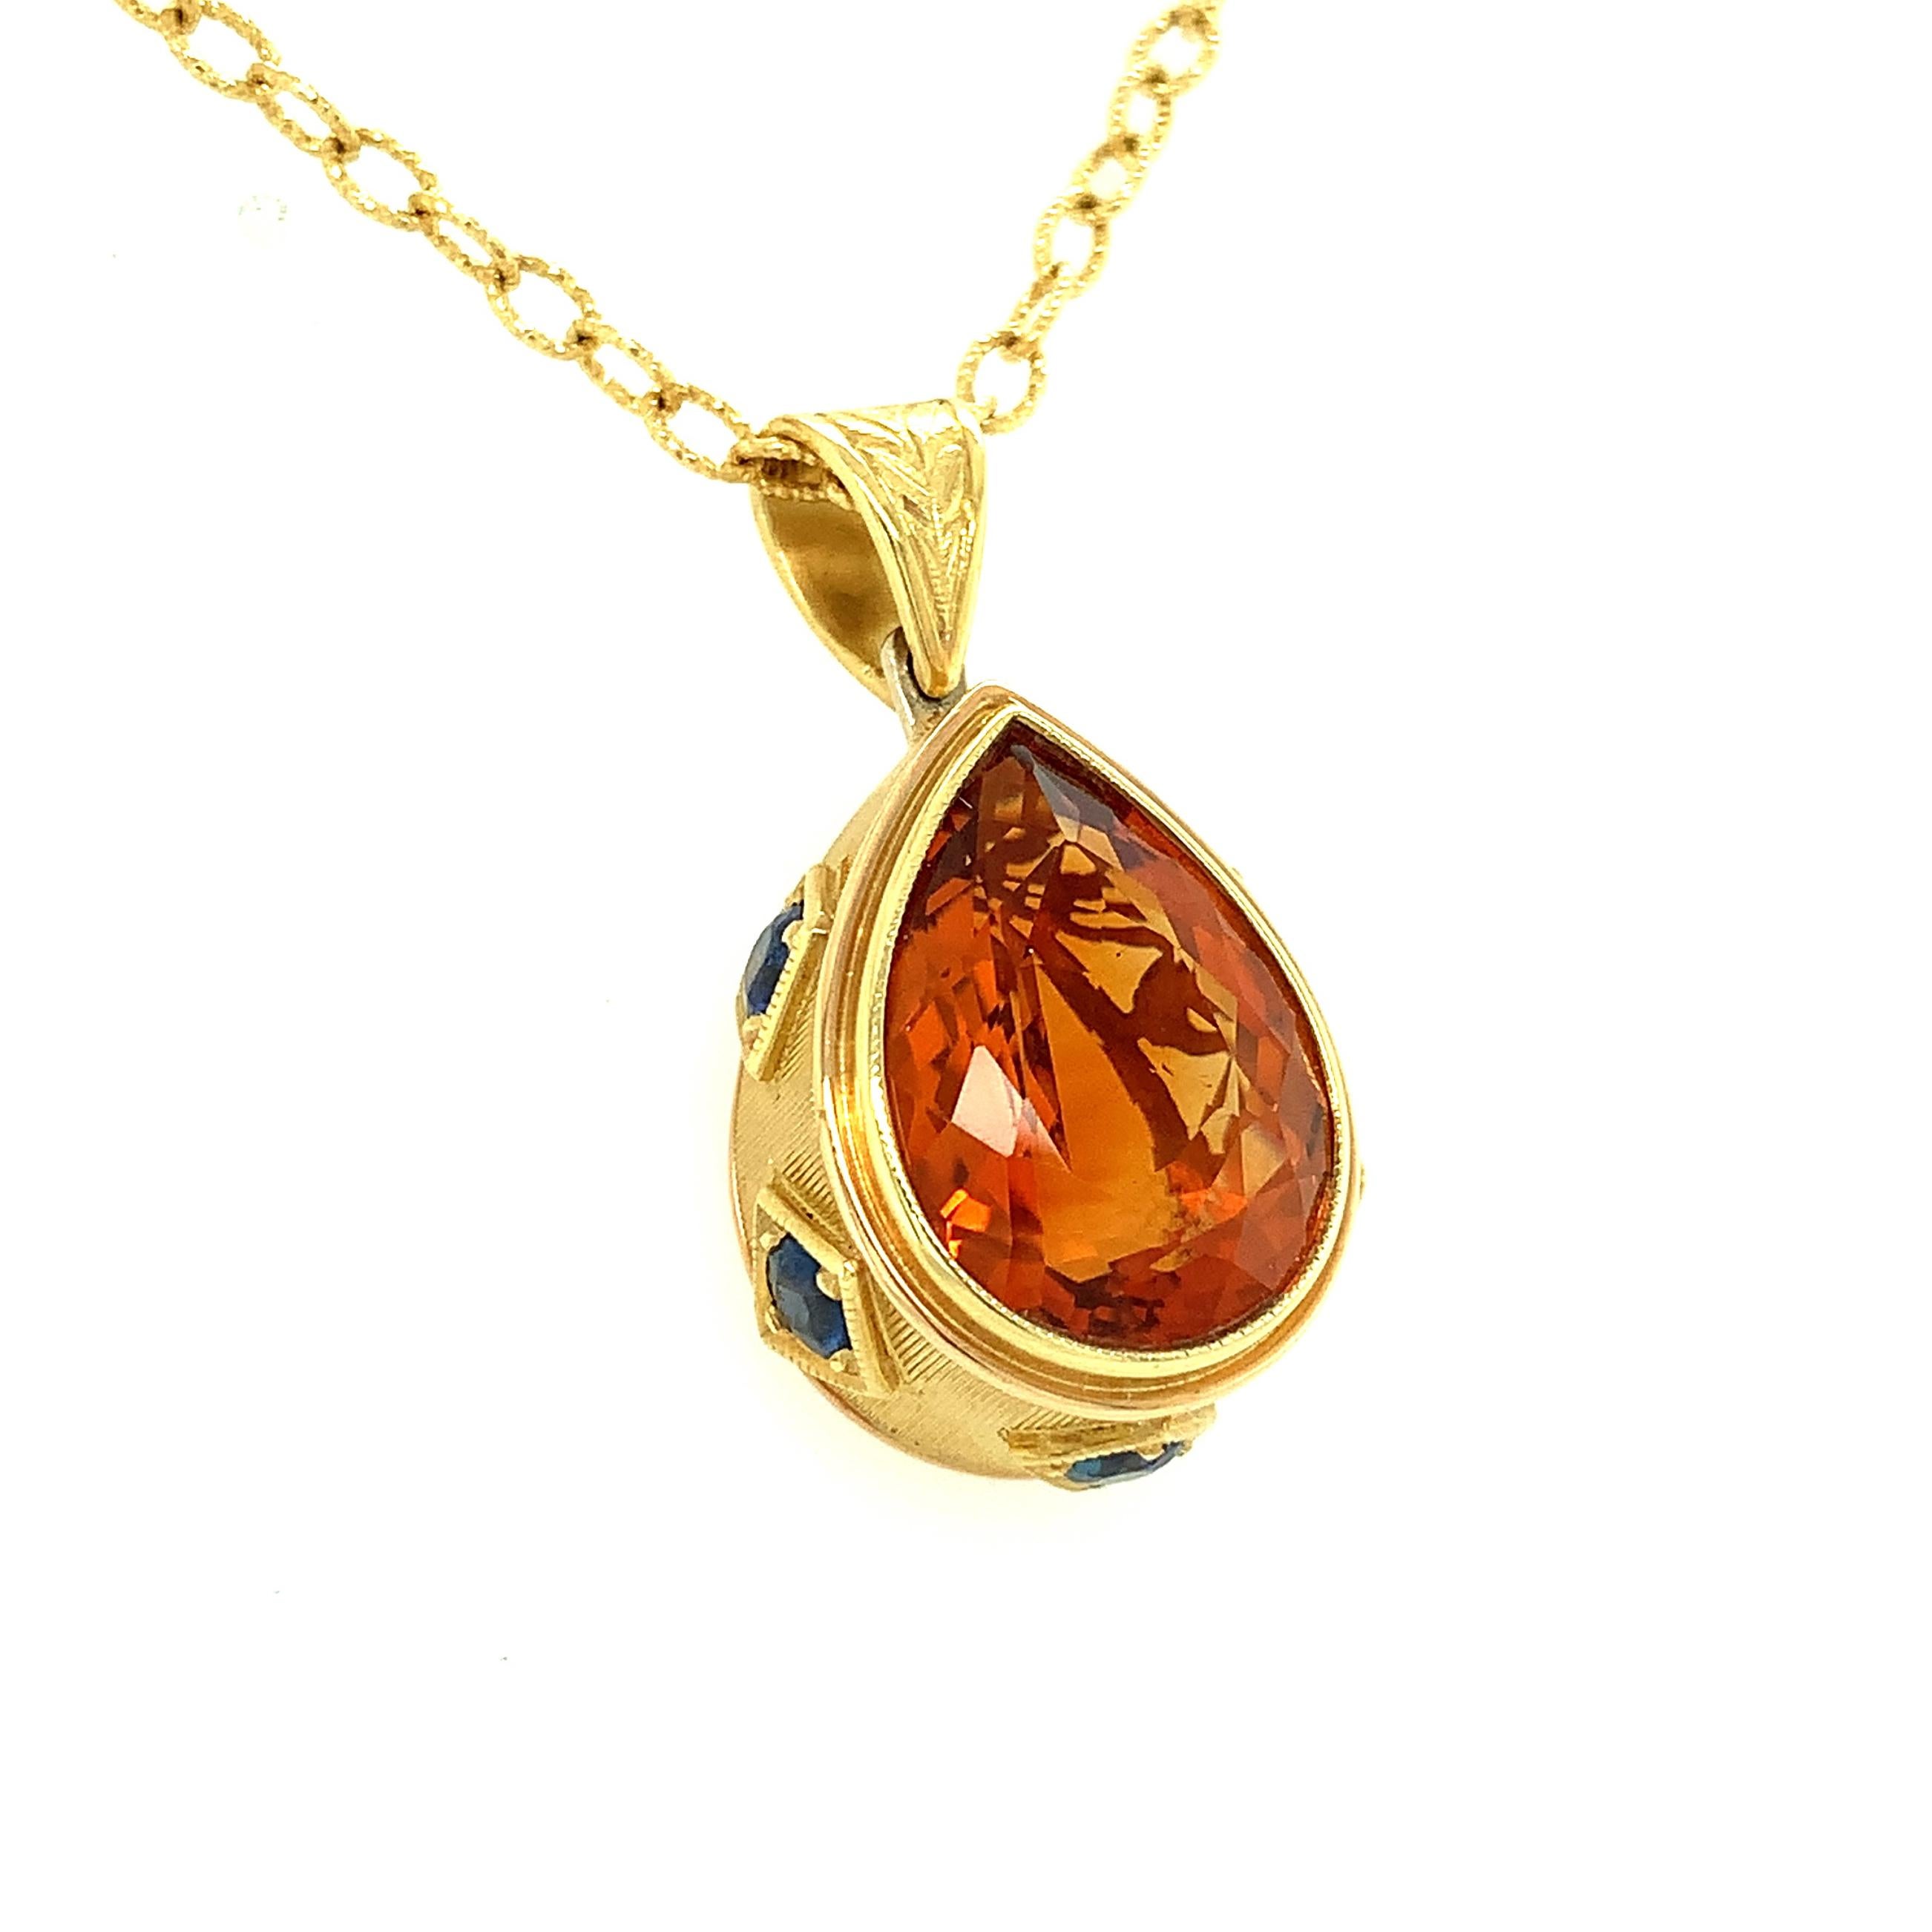 A rich, golden citrine and deep blue sapphires come together in this beautiful 18k pendant drop that has the presence and feel of an earlier time. The fine 